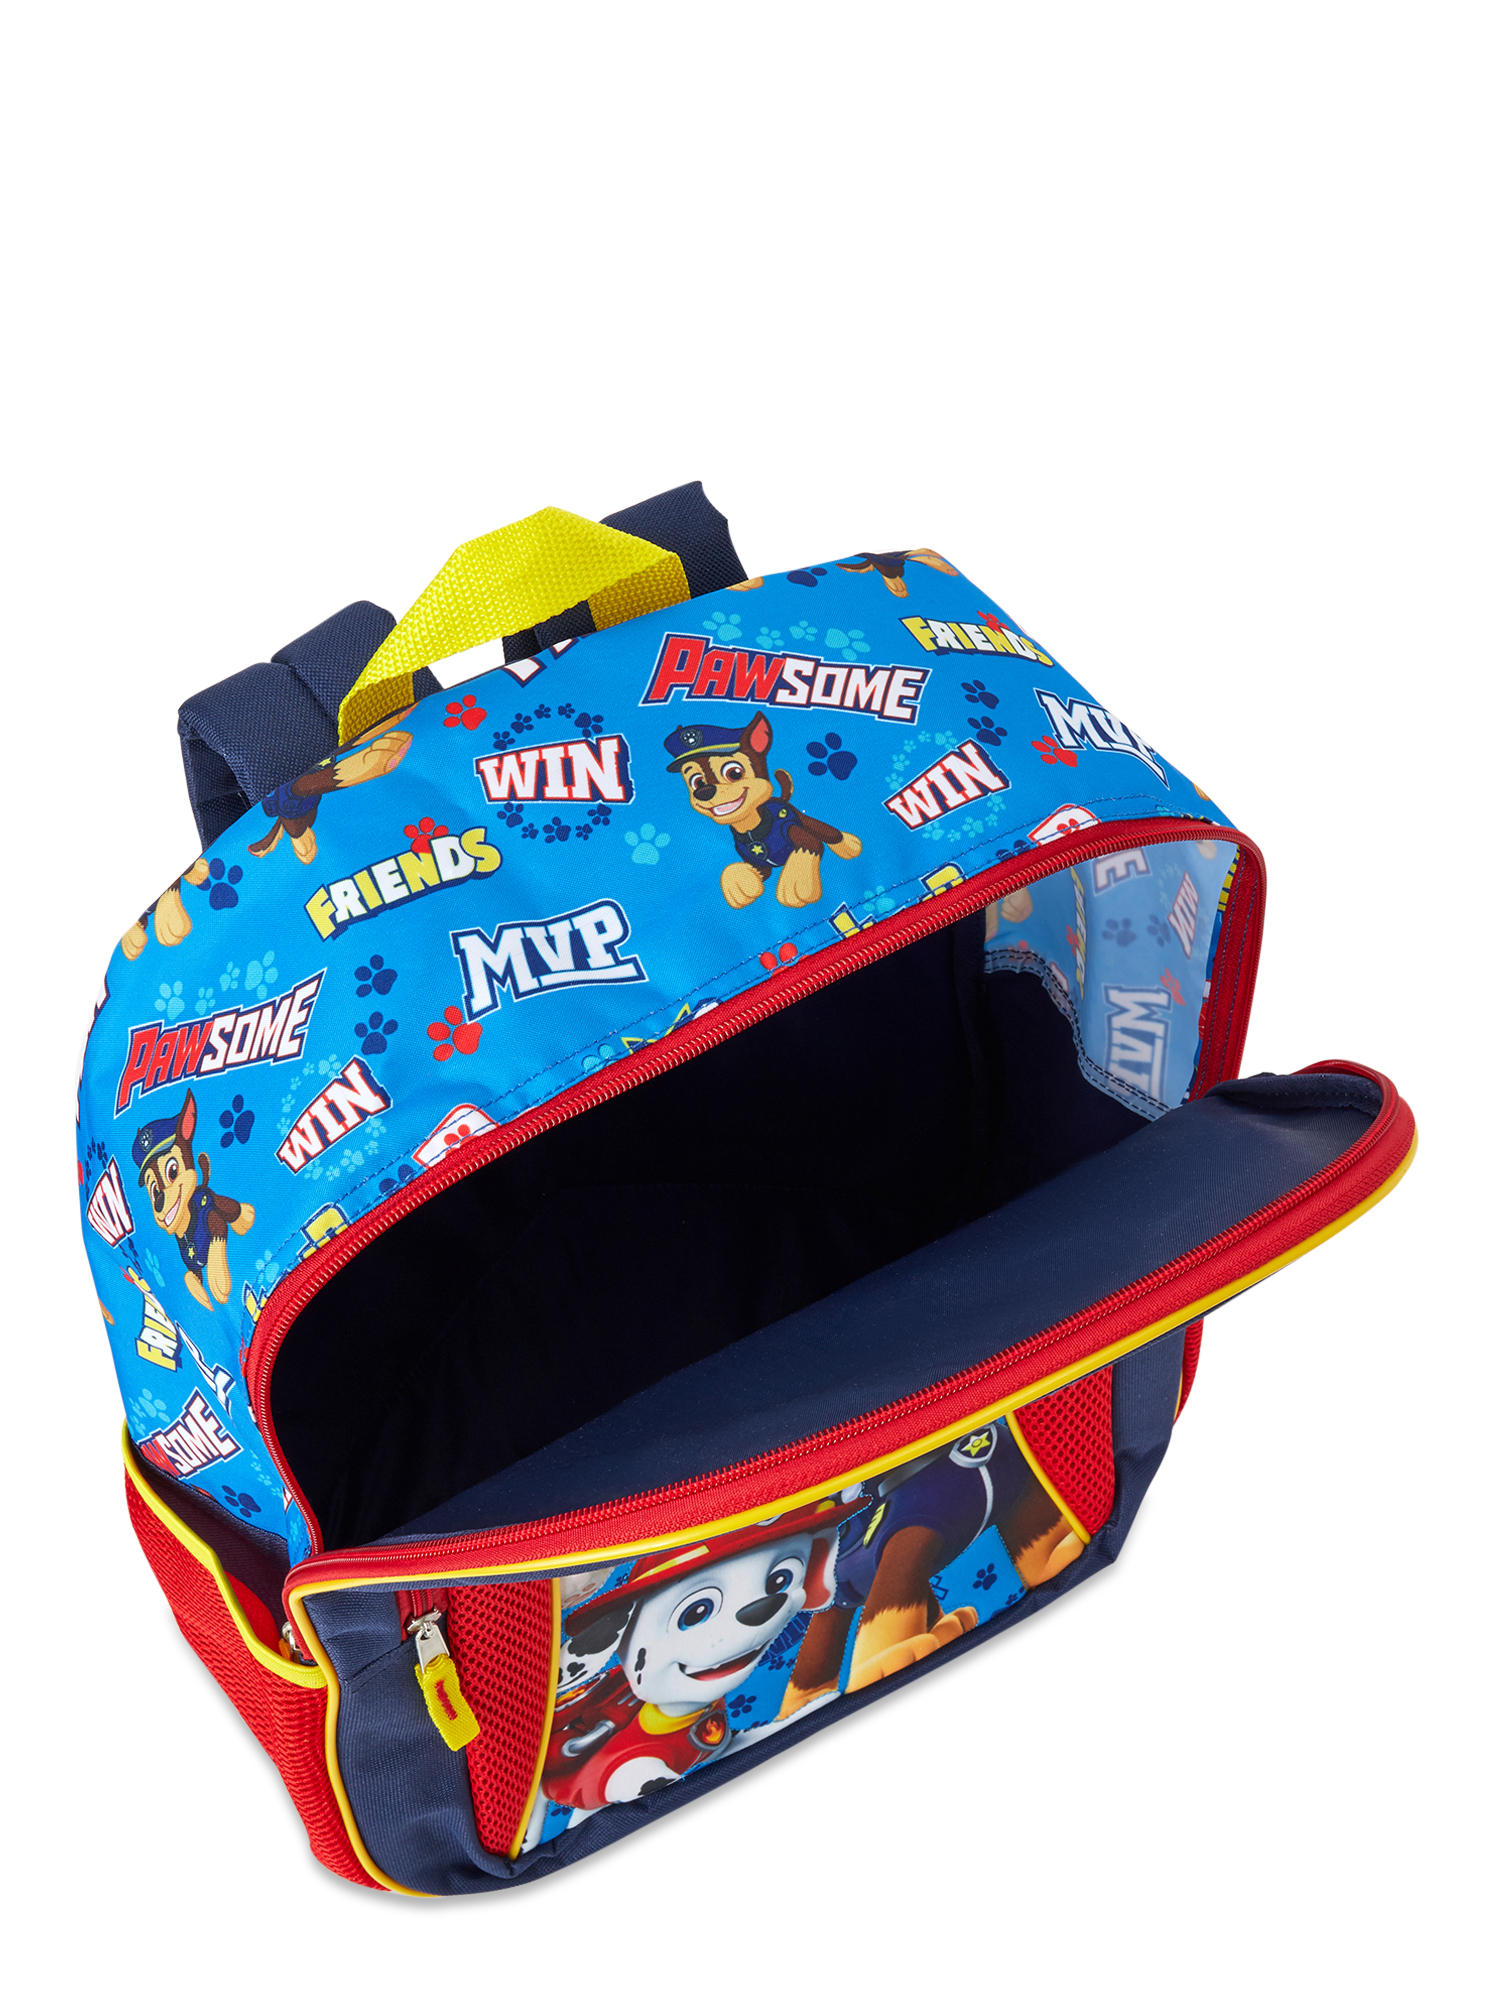 Paw Patrol Pawsome Backpack - image 5 of 6